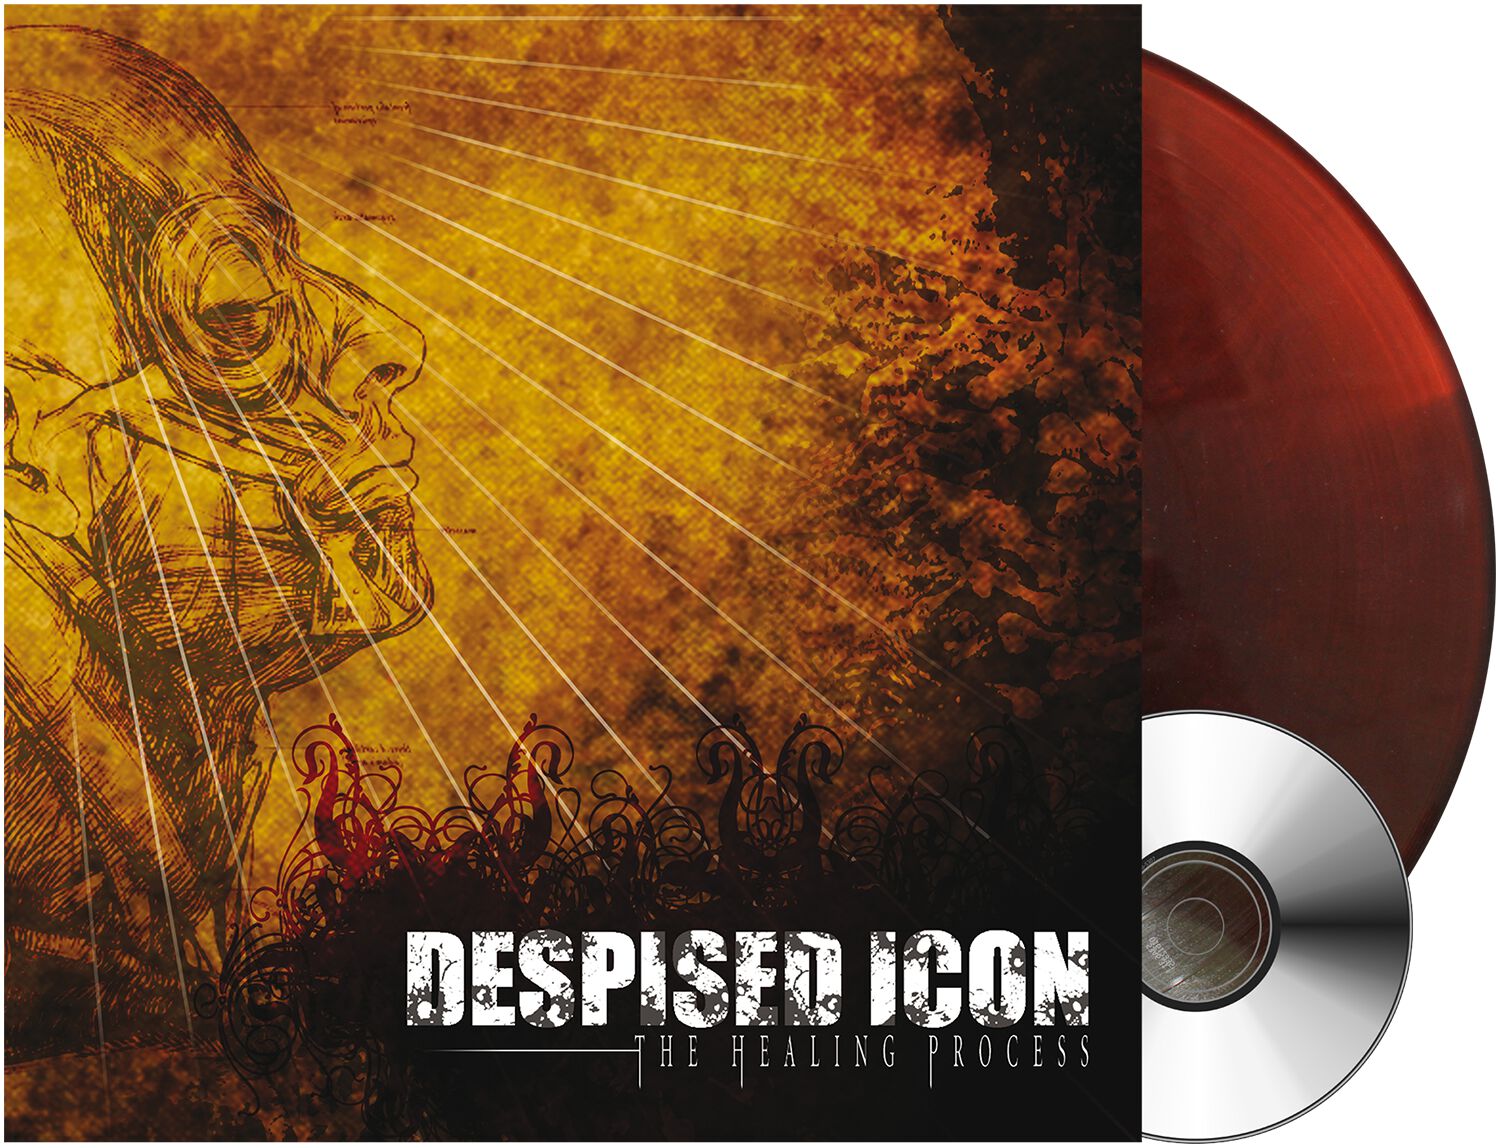 Image of Despised Icon The healing process LP & CD farbig